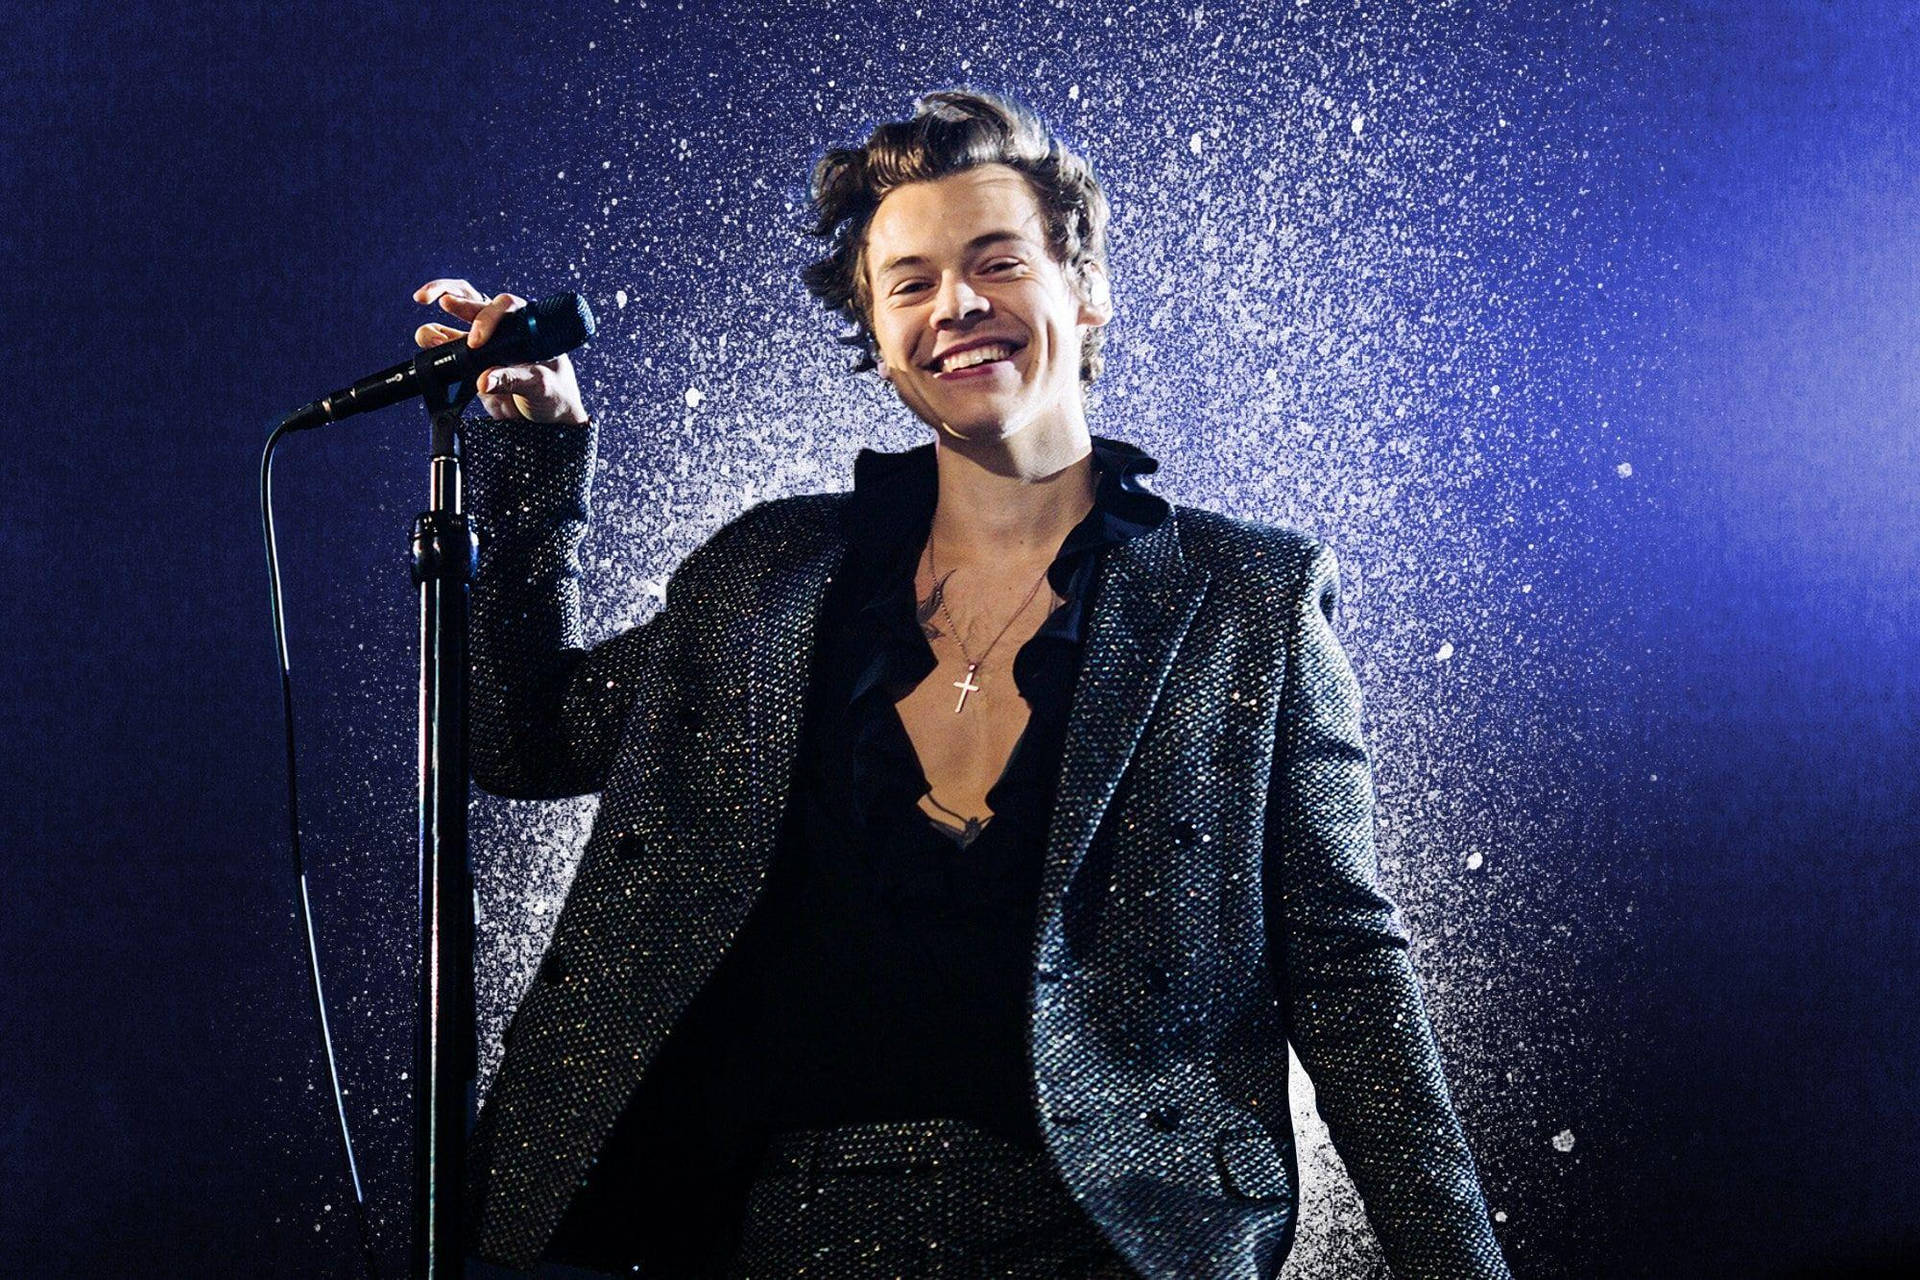 A smooth custom wallpaper of the famous singer Harry Styles for your iPhone. Wallpaper